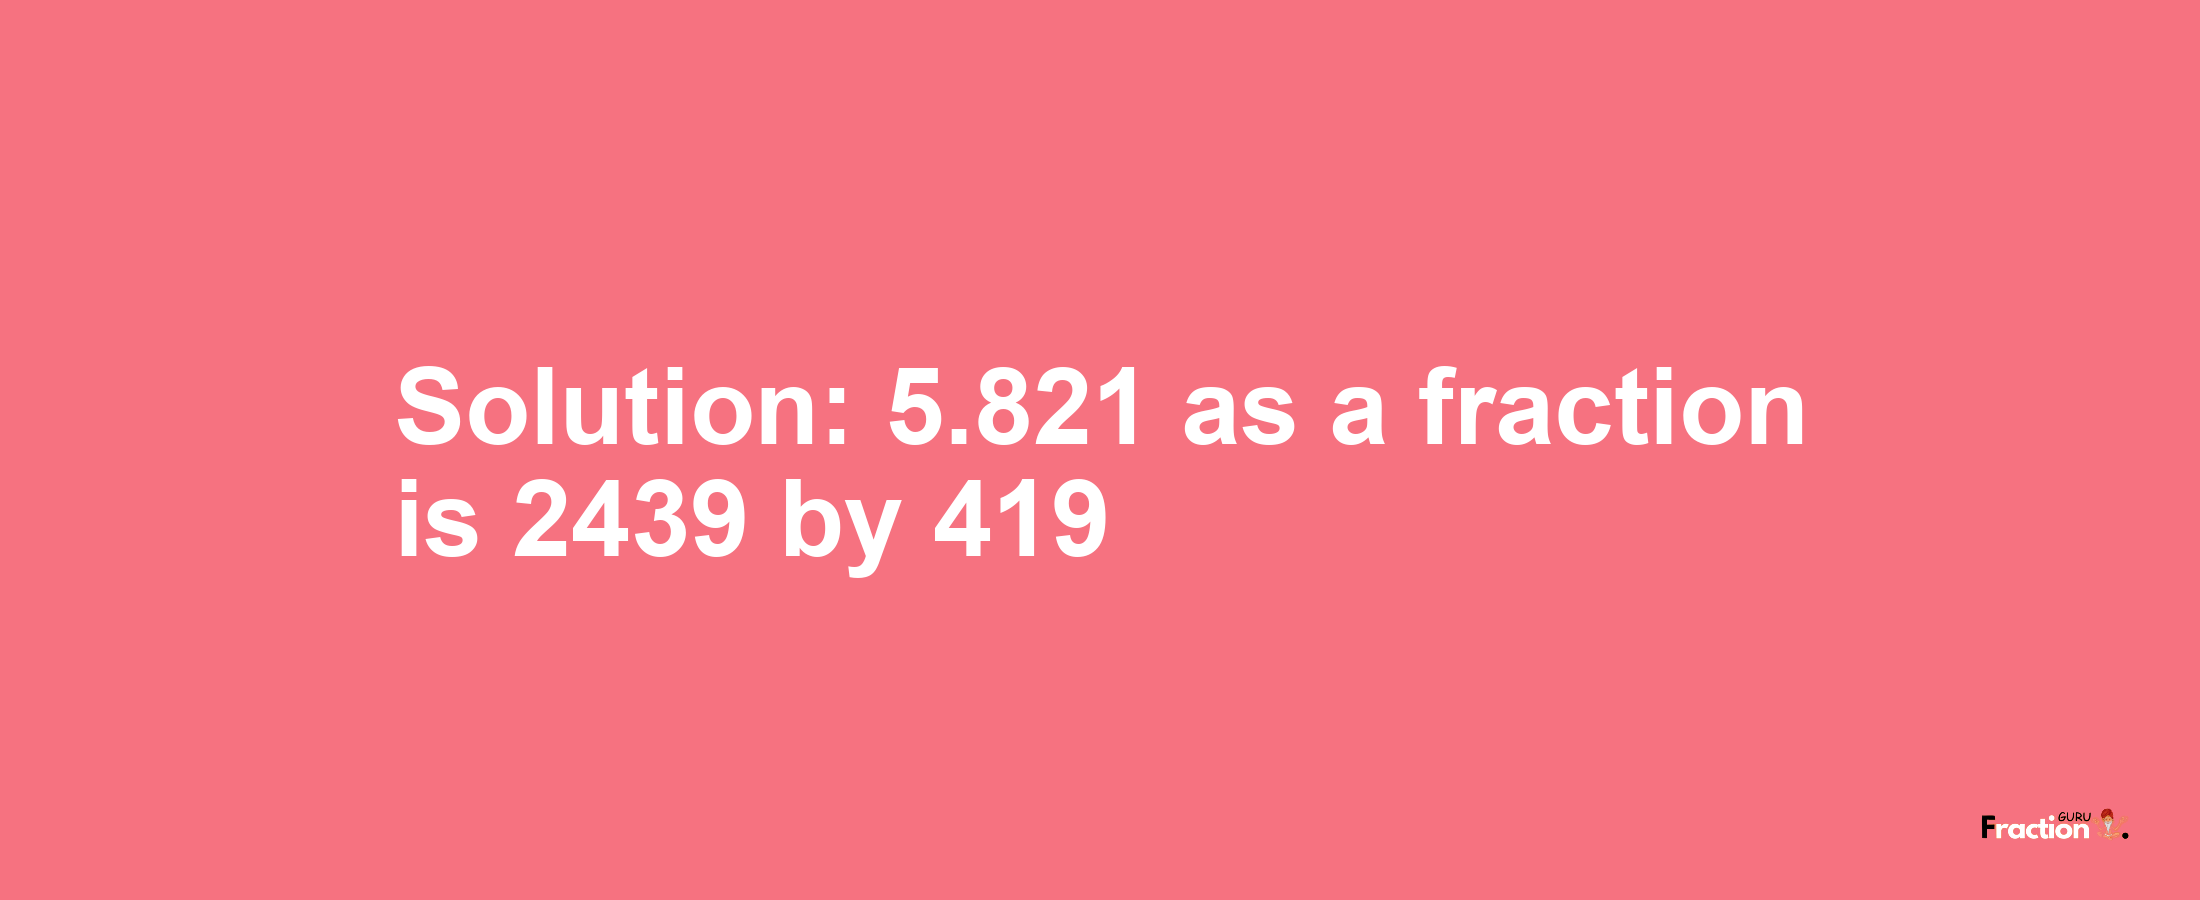 Solution:5.821 as a fraction is 2439/419